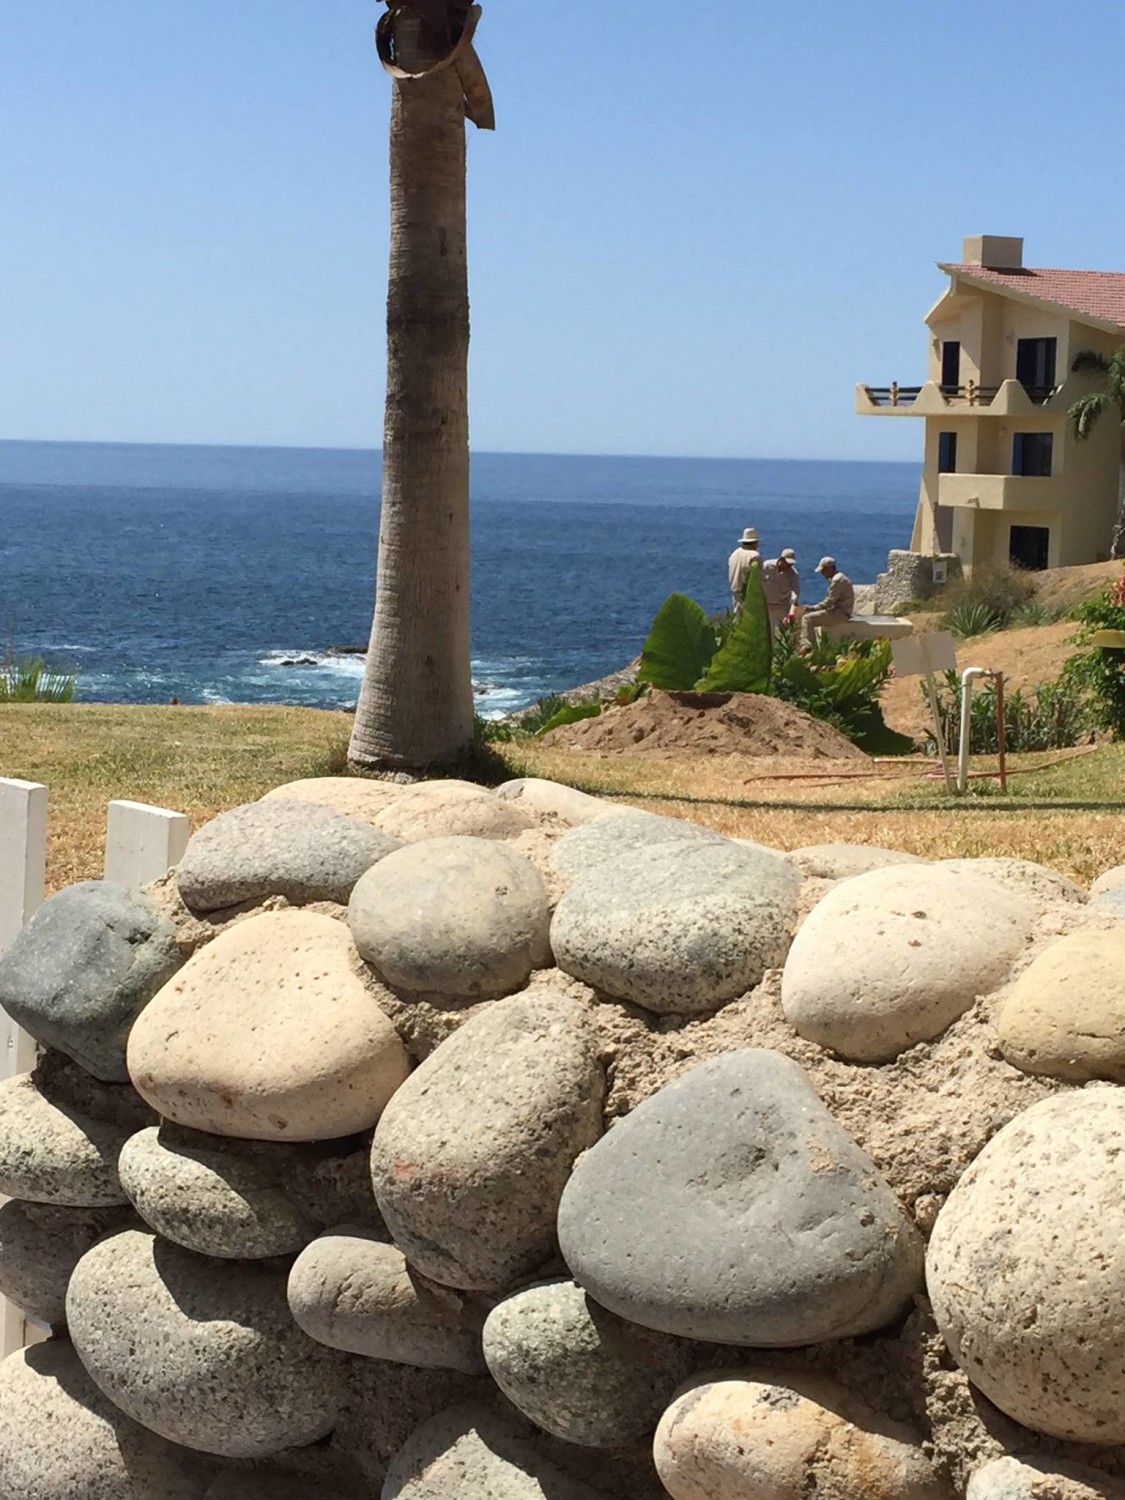 View of rocks and ocean at Misiones del Cabo